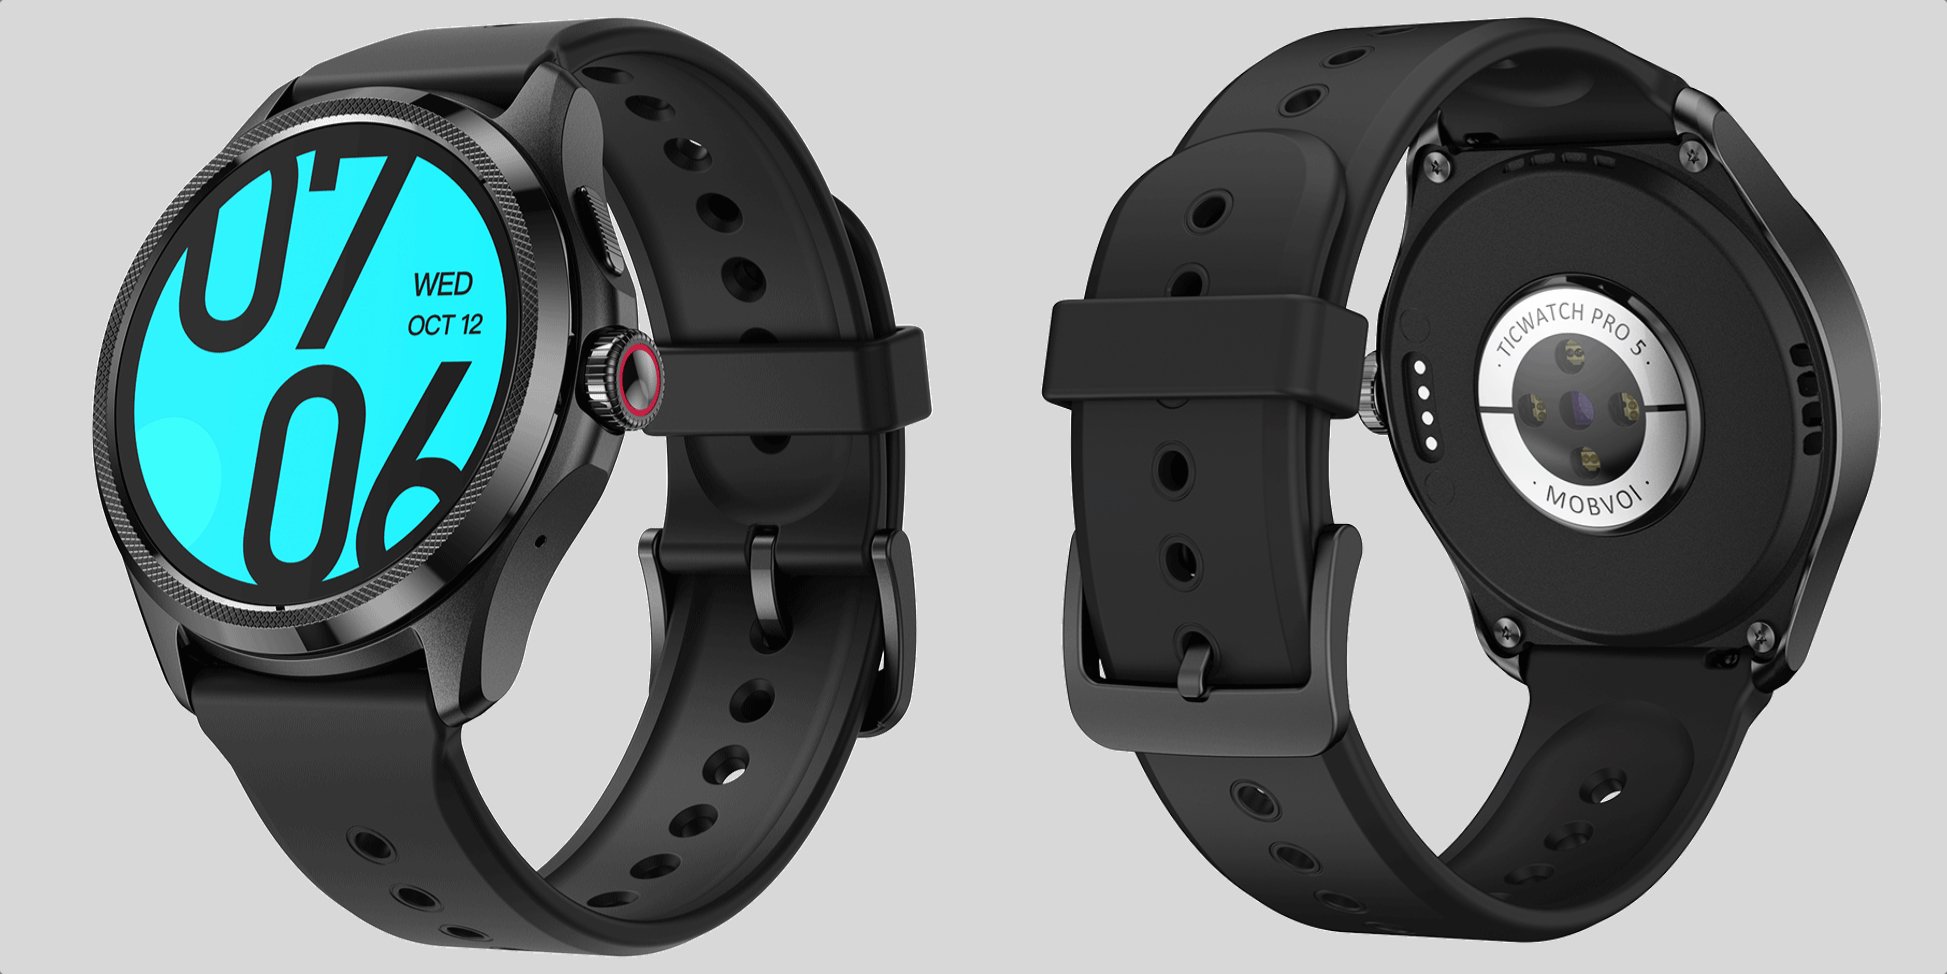 The TicWatch Pro 5 smart watch with an AMOLED screen and a top-end Snapdragon chip is presented